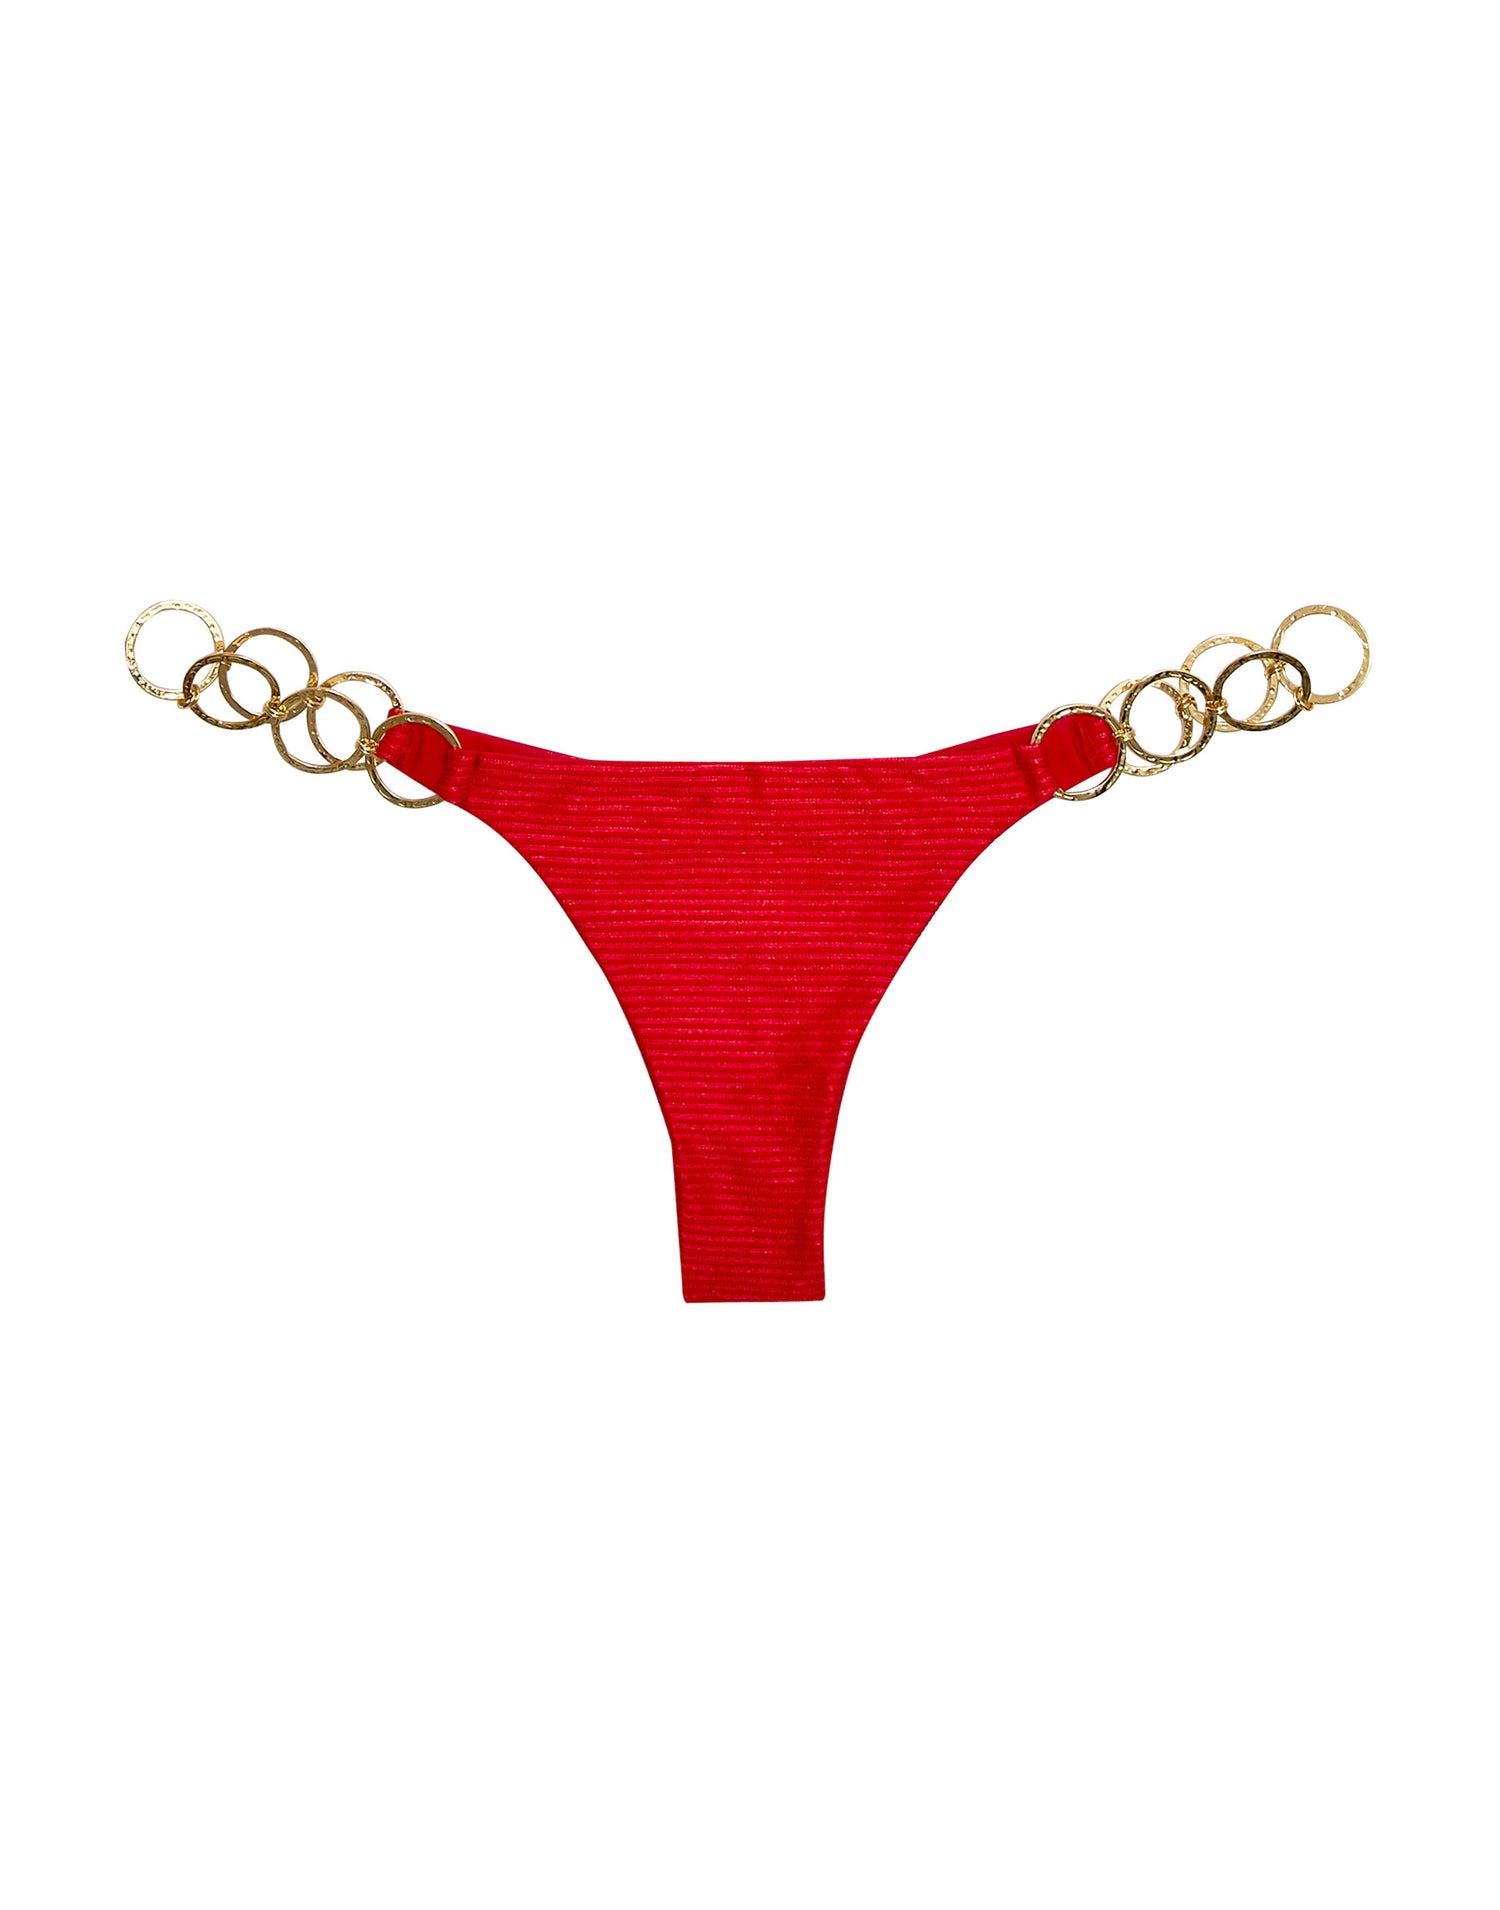 Lexi Brazilian Bikini Bottom in Red Rib with Gold Hammered Ring Hardware - Product View